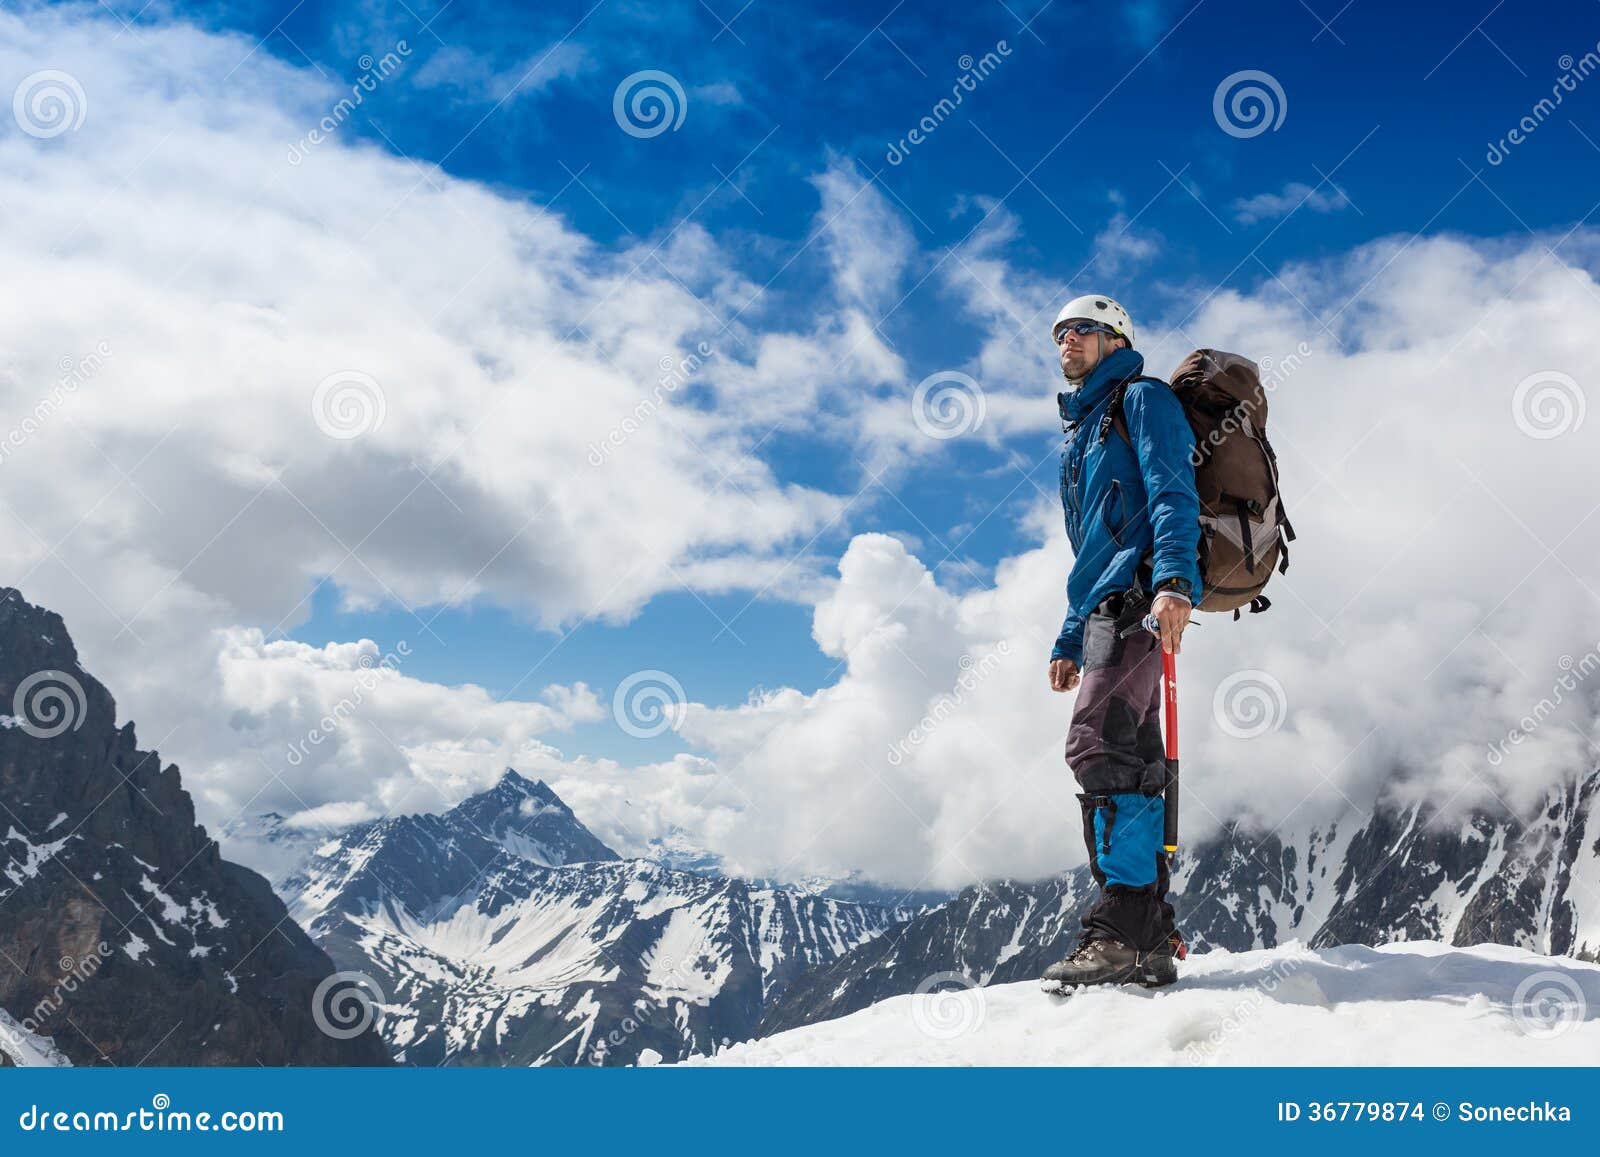 mountaineer reaches the top of a snowy mountain in a sunny winter day